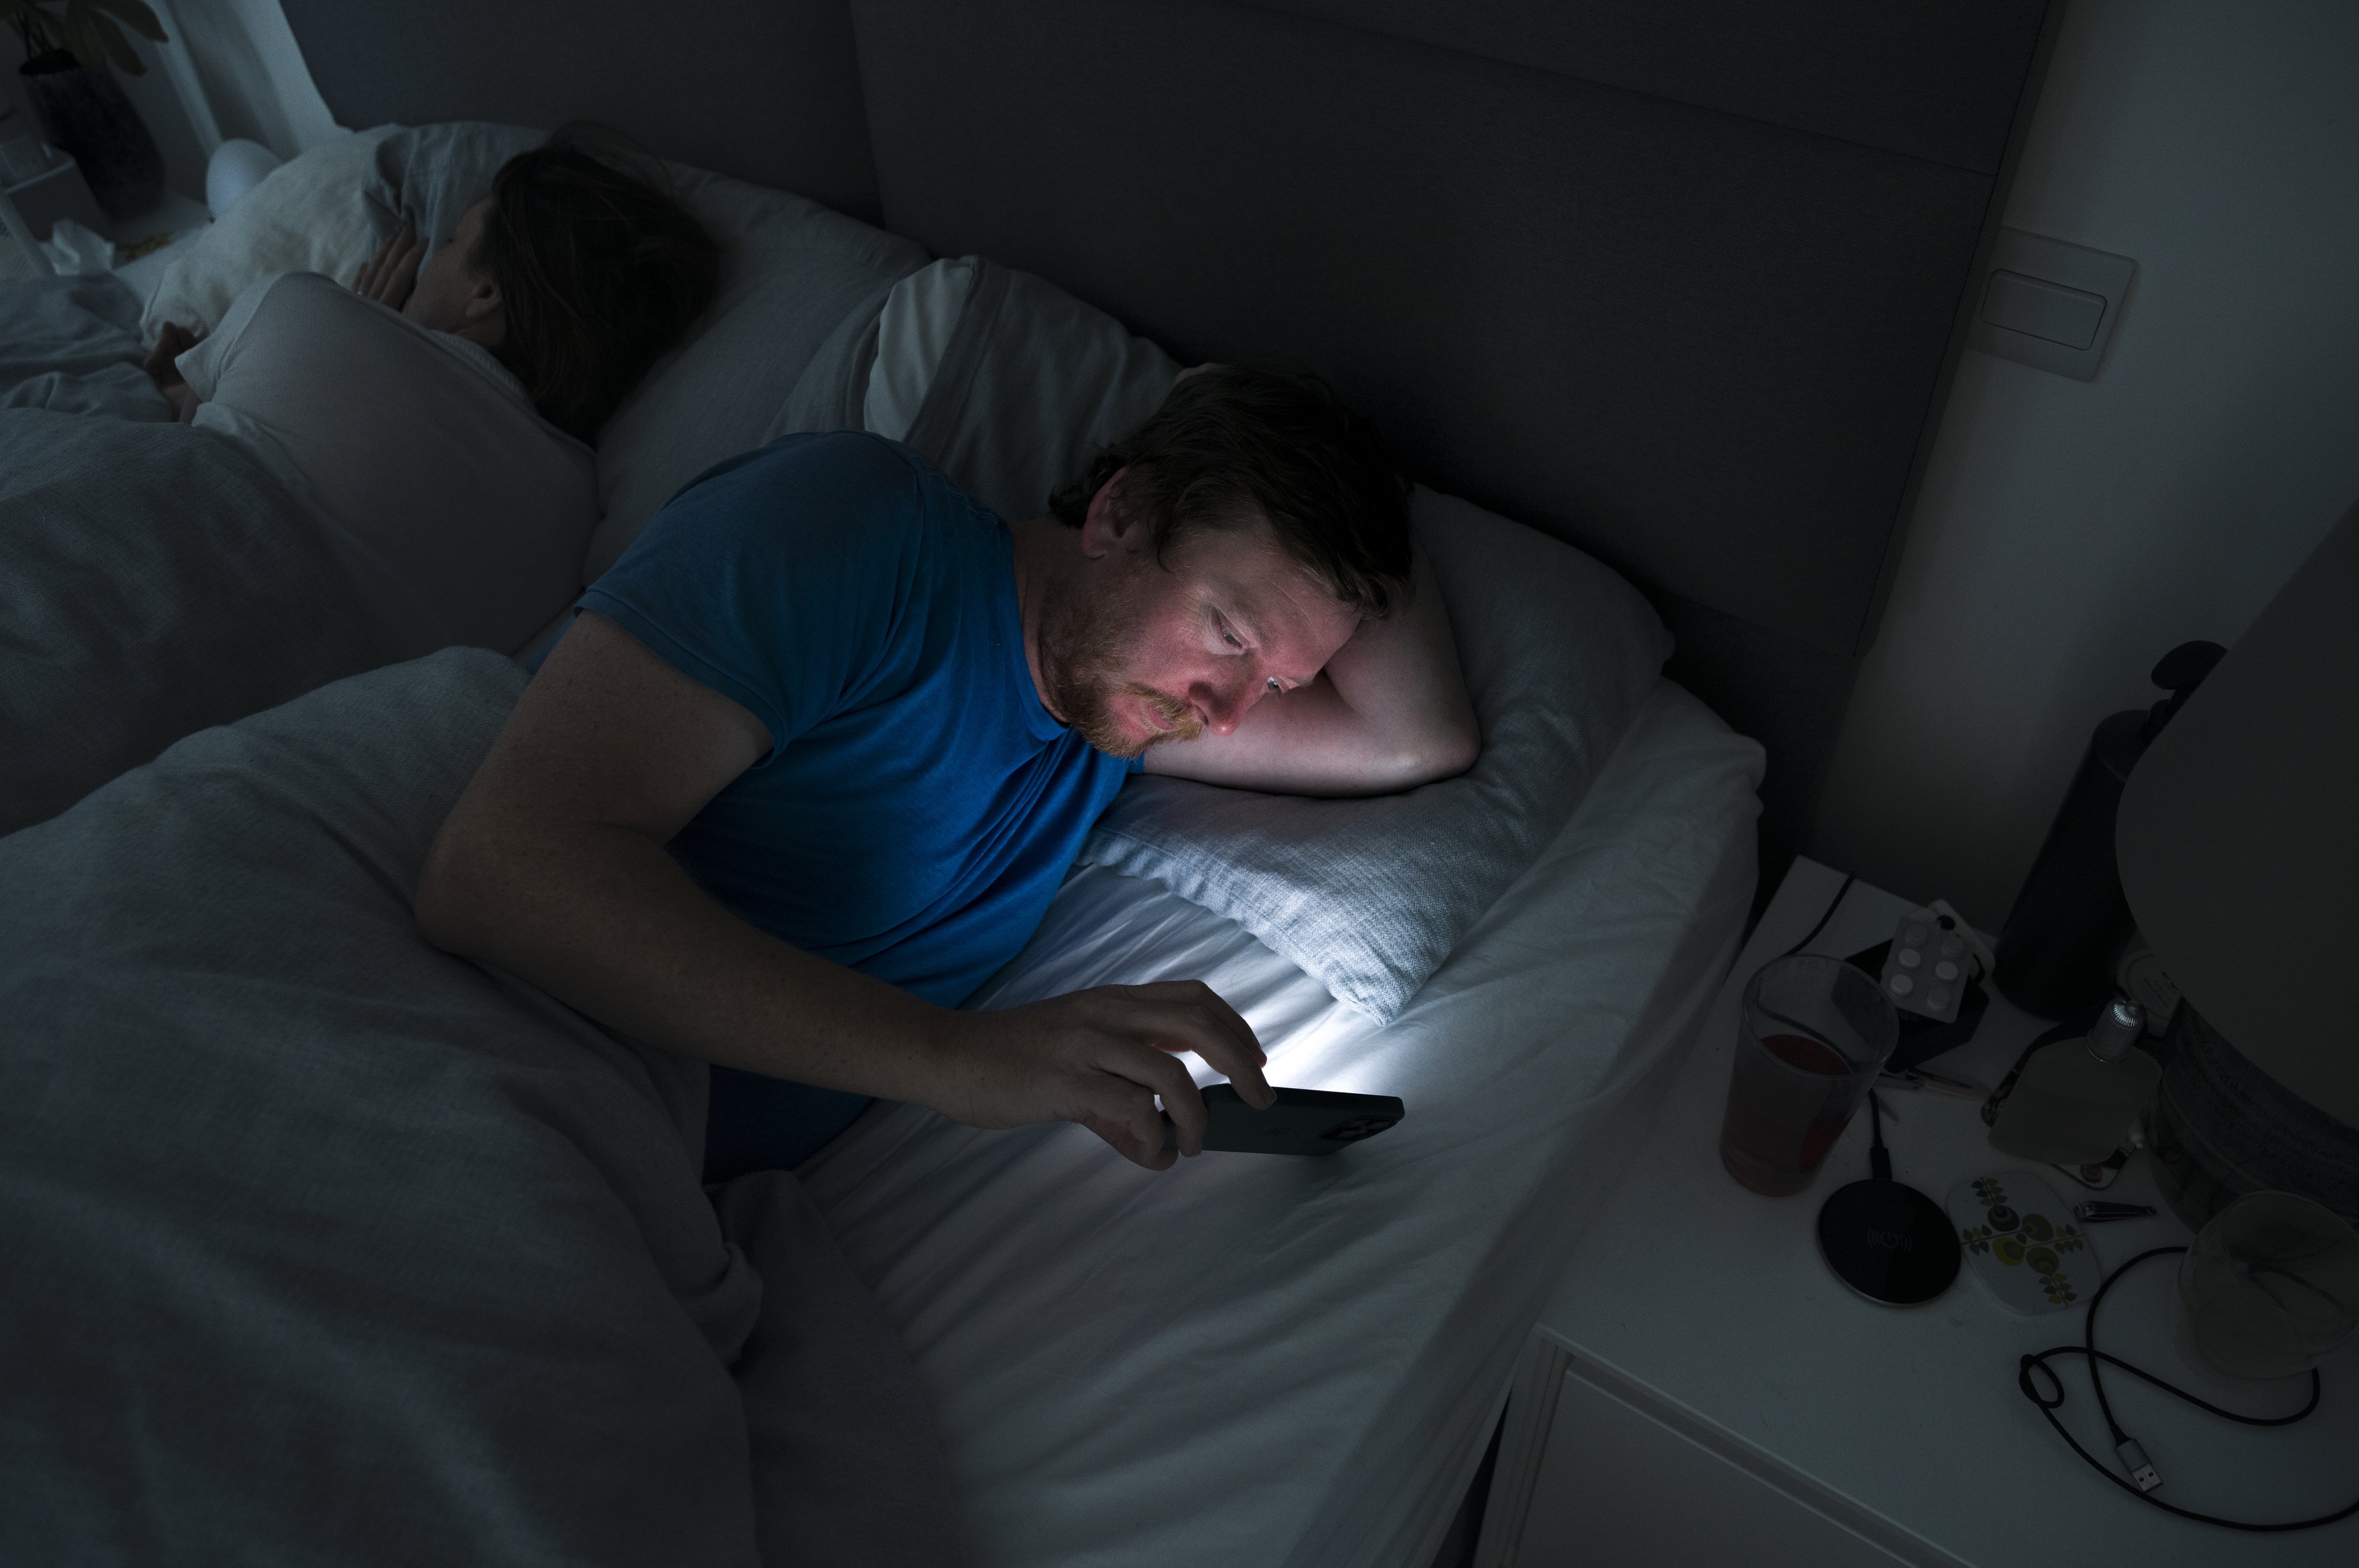 Man in bed using phone with another person asleep beside him, highlighting the impact of screen time on sleep